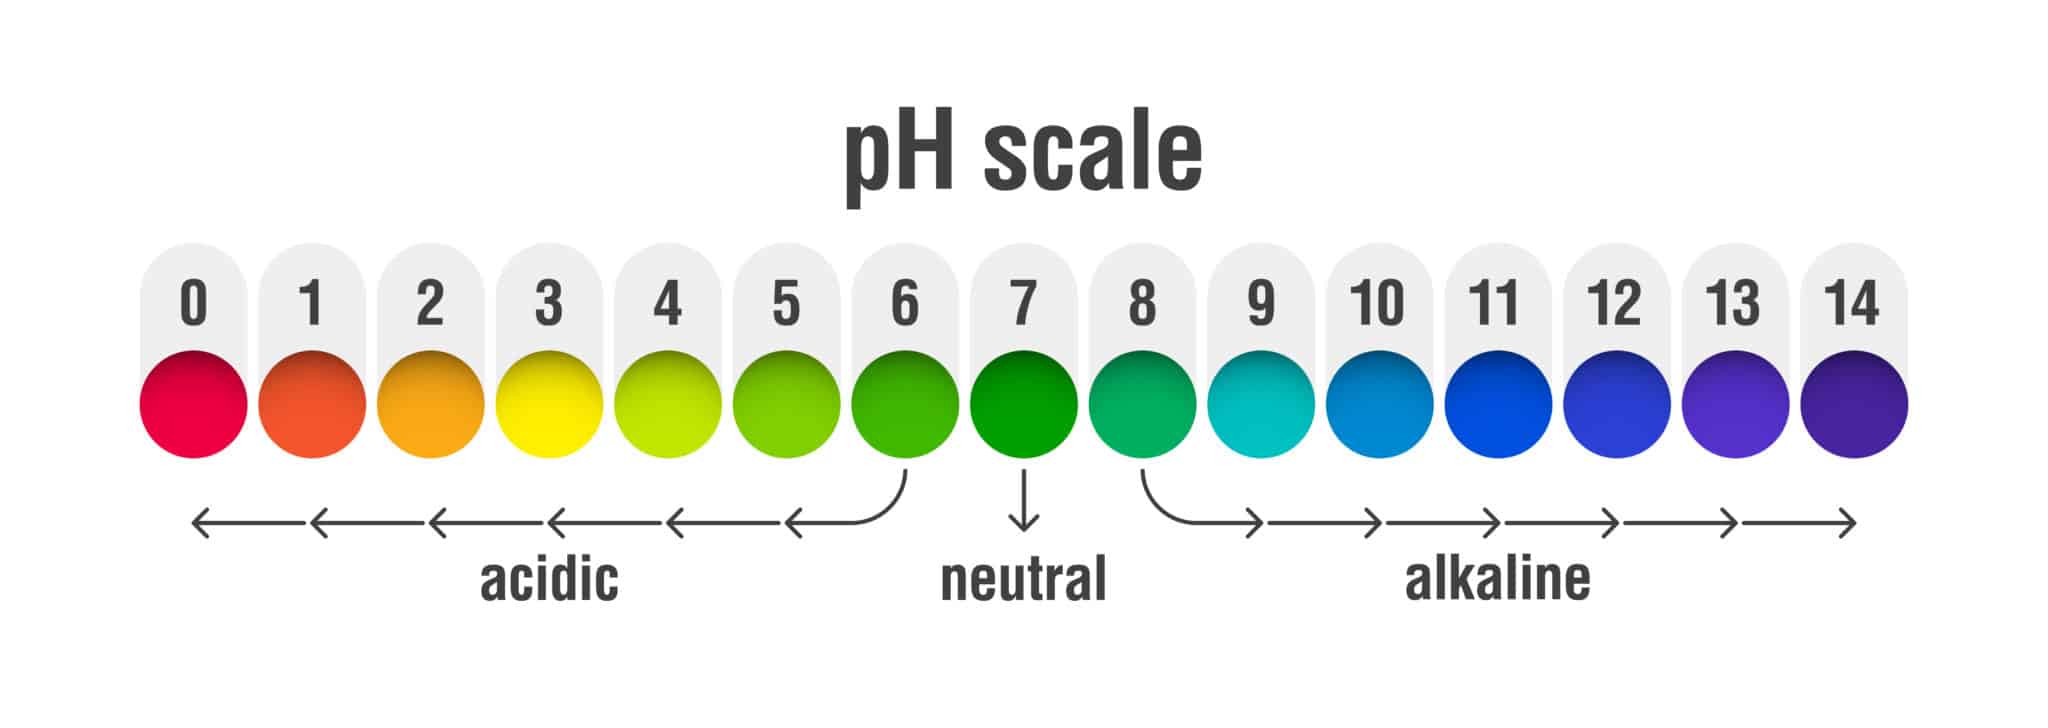 pH sacle with color dots and numbered scale